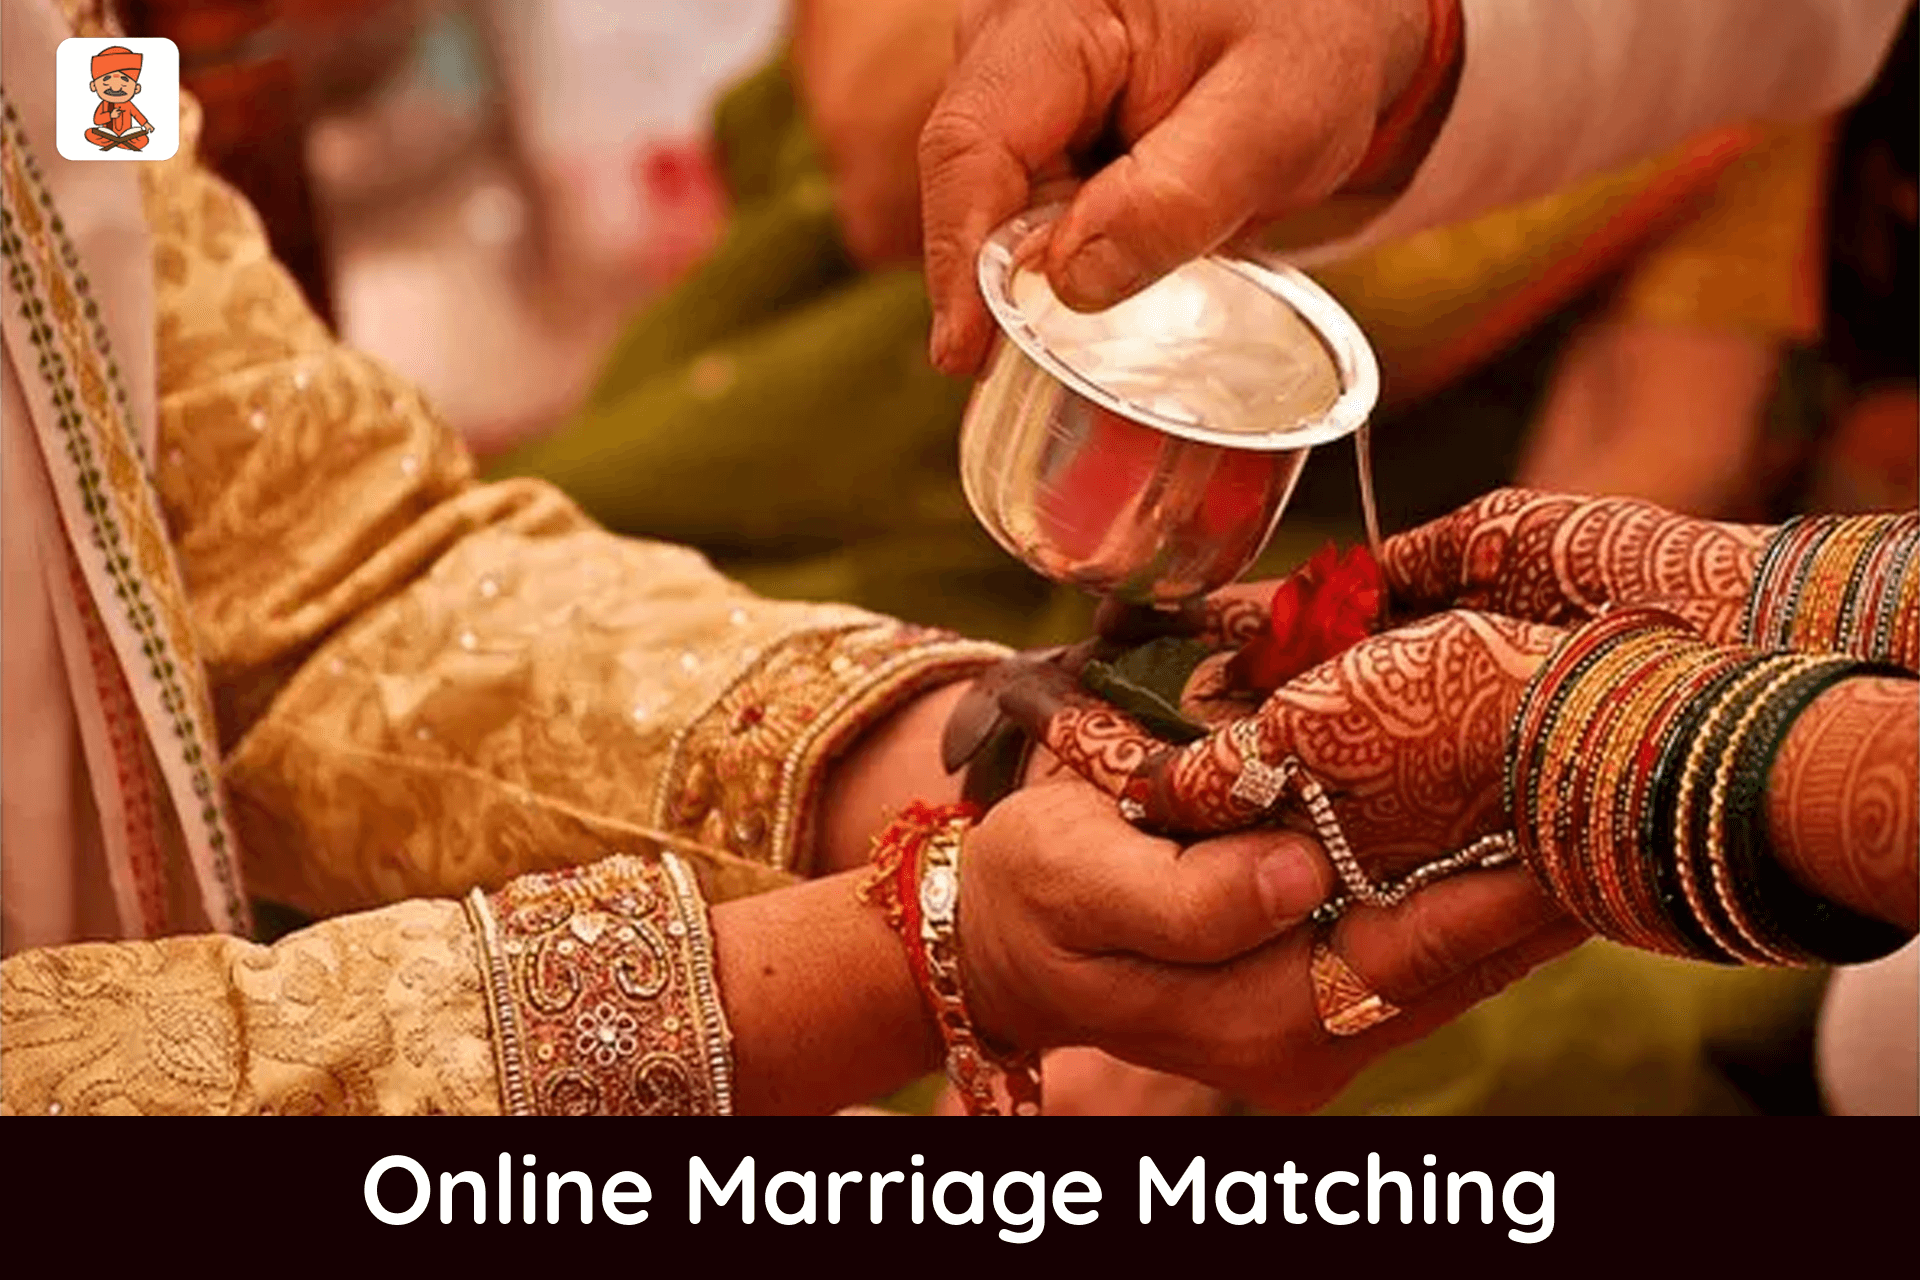 Find The Perfect Partner For Yourself Through Online Marriage Matching